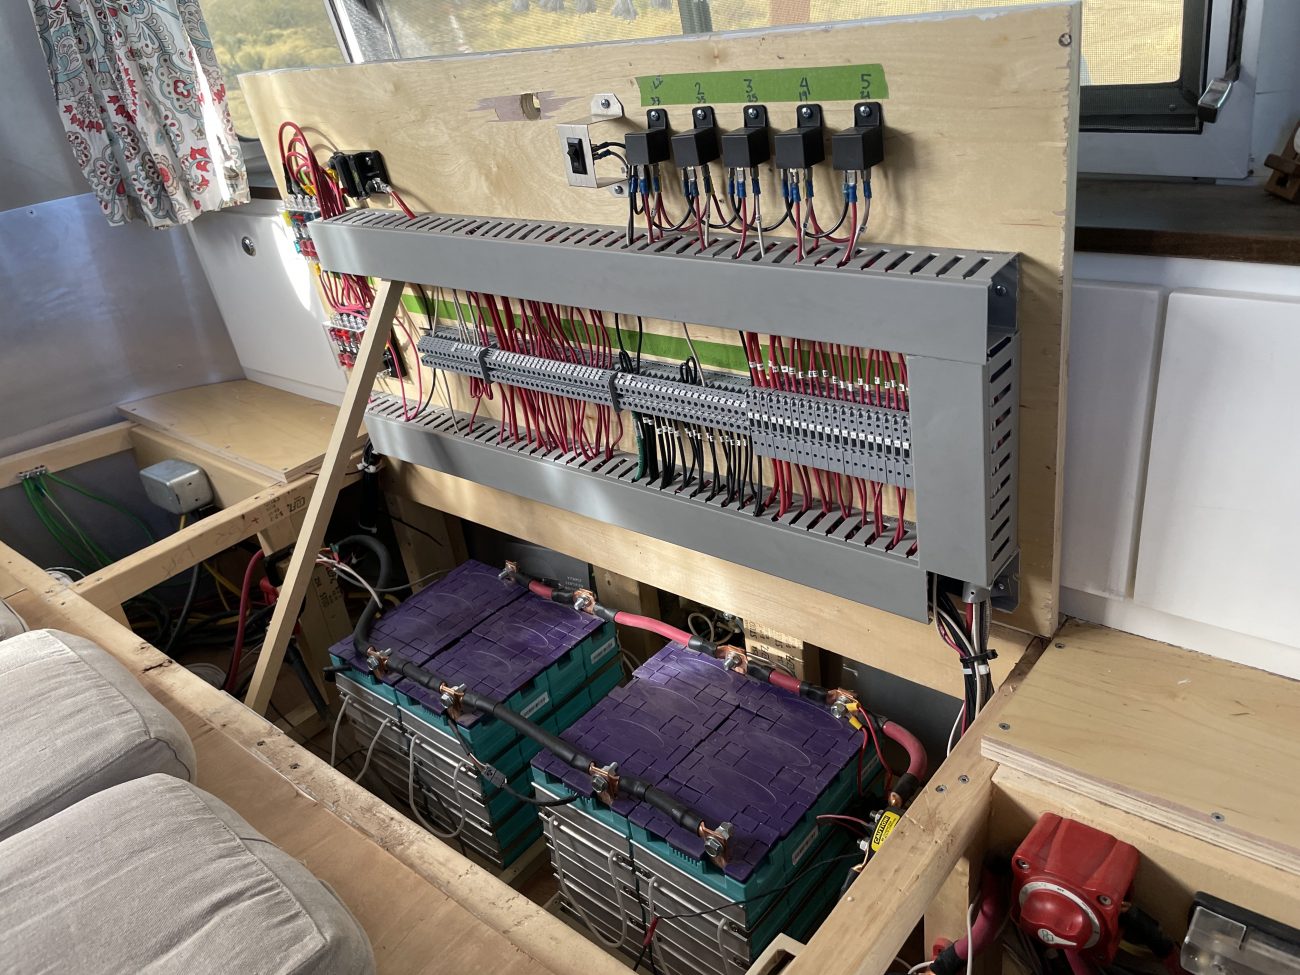 Organized 12V wiring system uses DIN Rail and Terminal Blocks